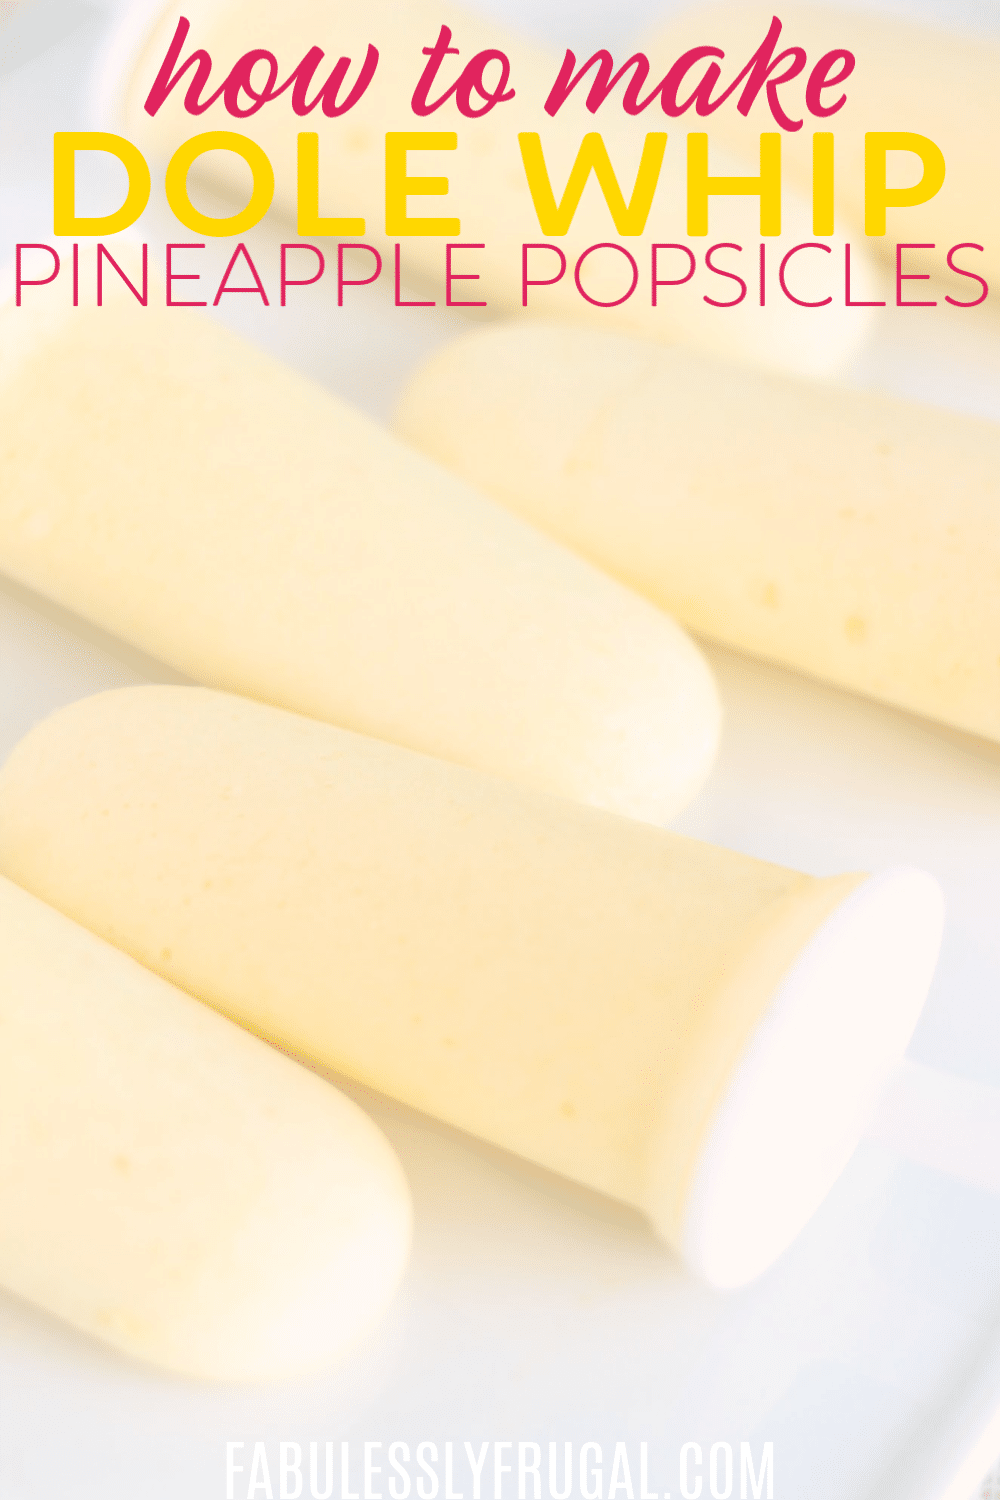 how to make pineapple dole whip popsicles recipe